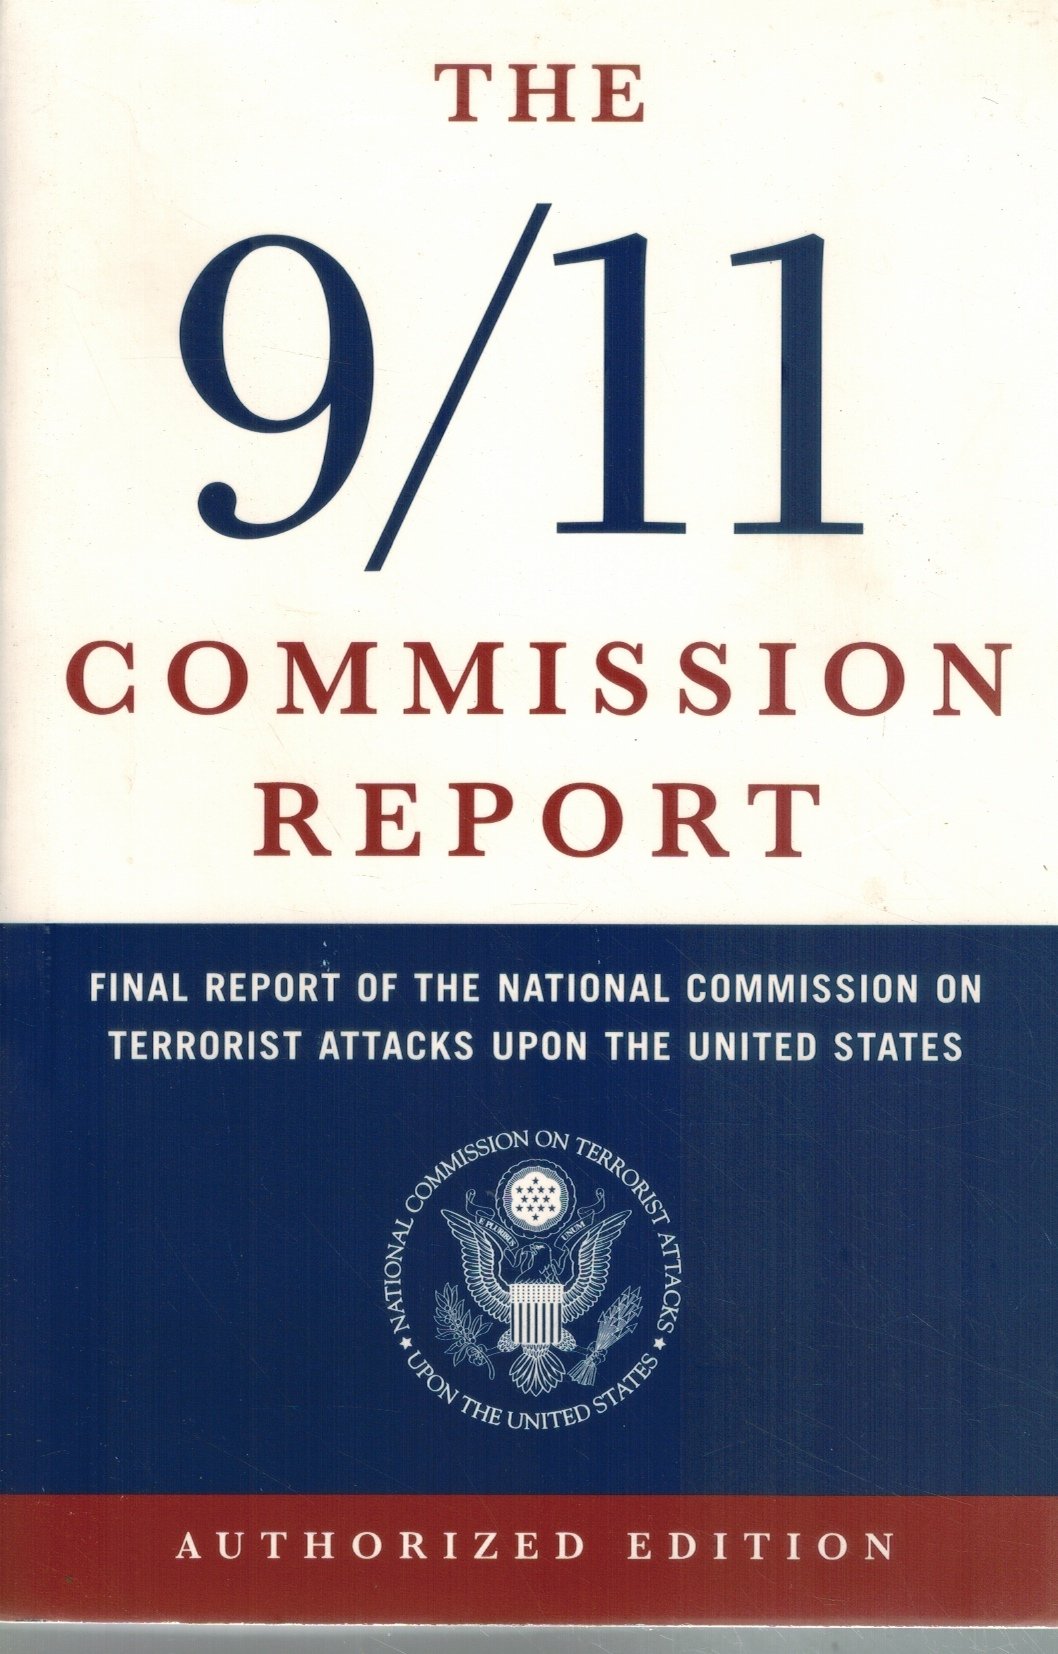 THE 9/11 COMMISSION REPORT  Final Report of the National Commission on  Terrorist Attacks Upon the United States  by National Commission On Terrorist Attacks